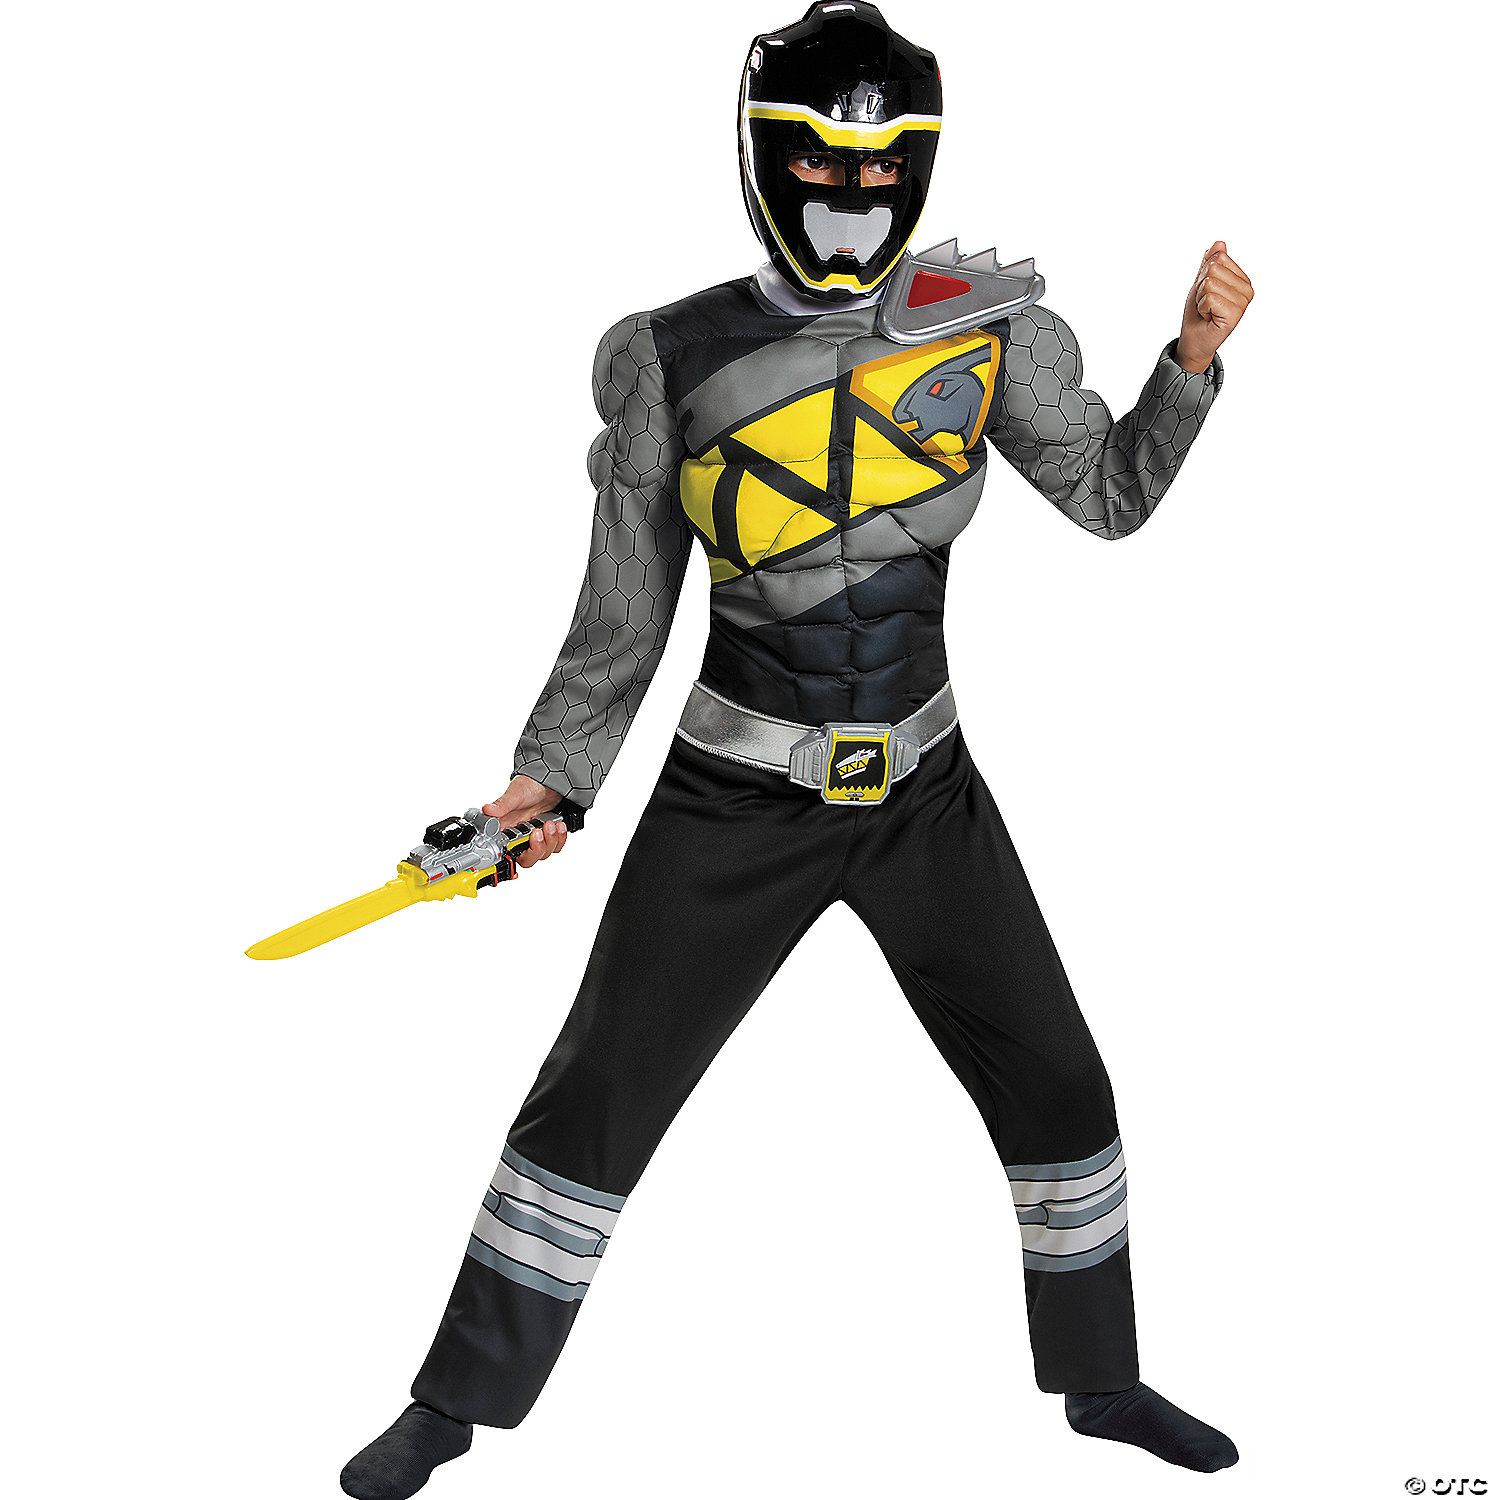 Disguise Boy's Black Ranger Muscle Costume - Dino Charge